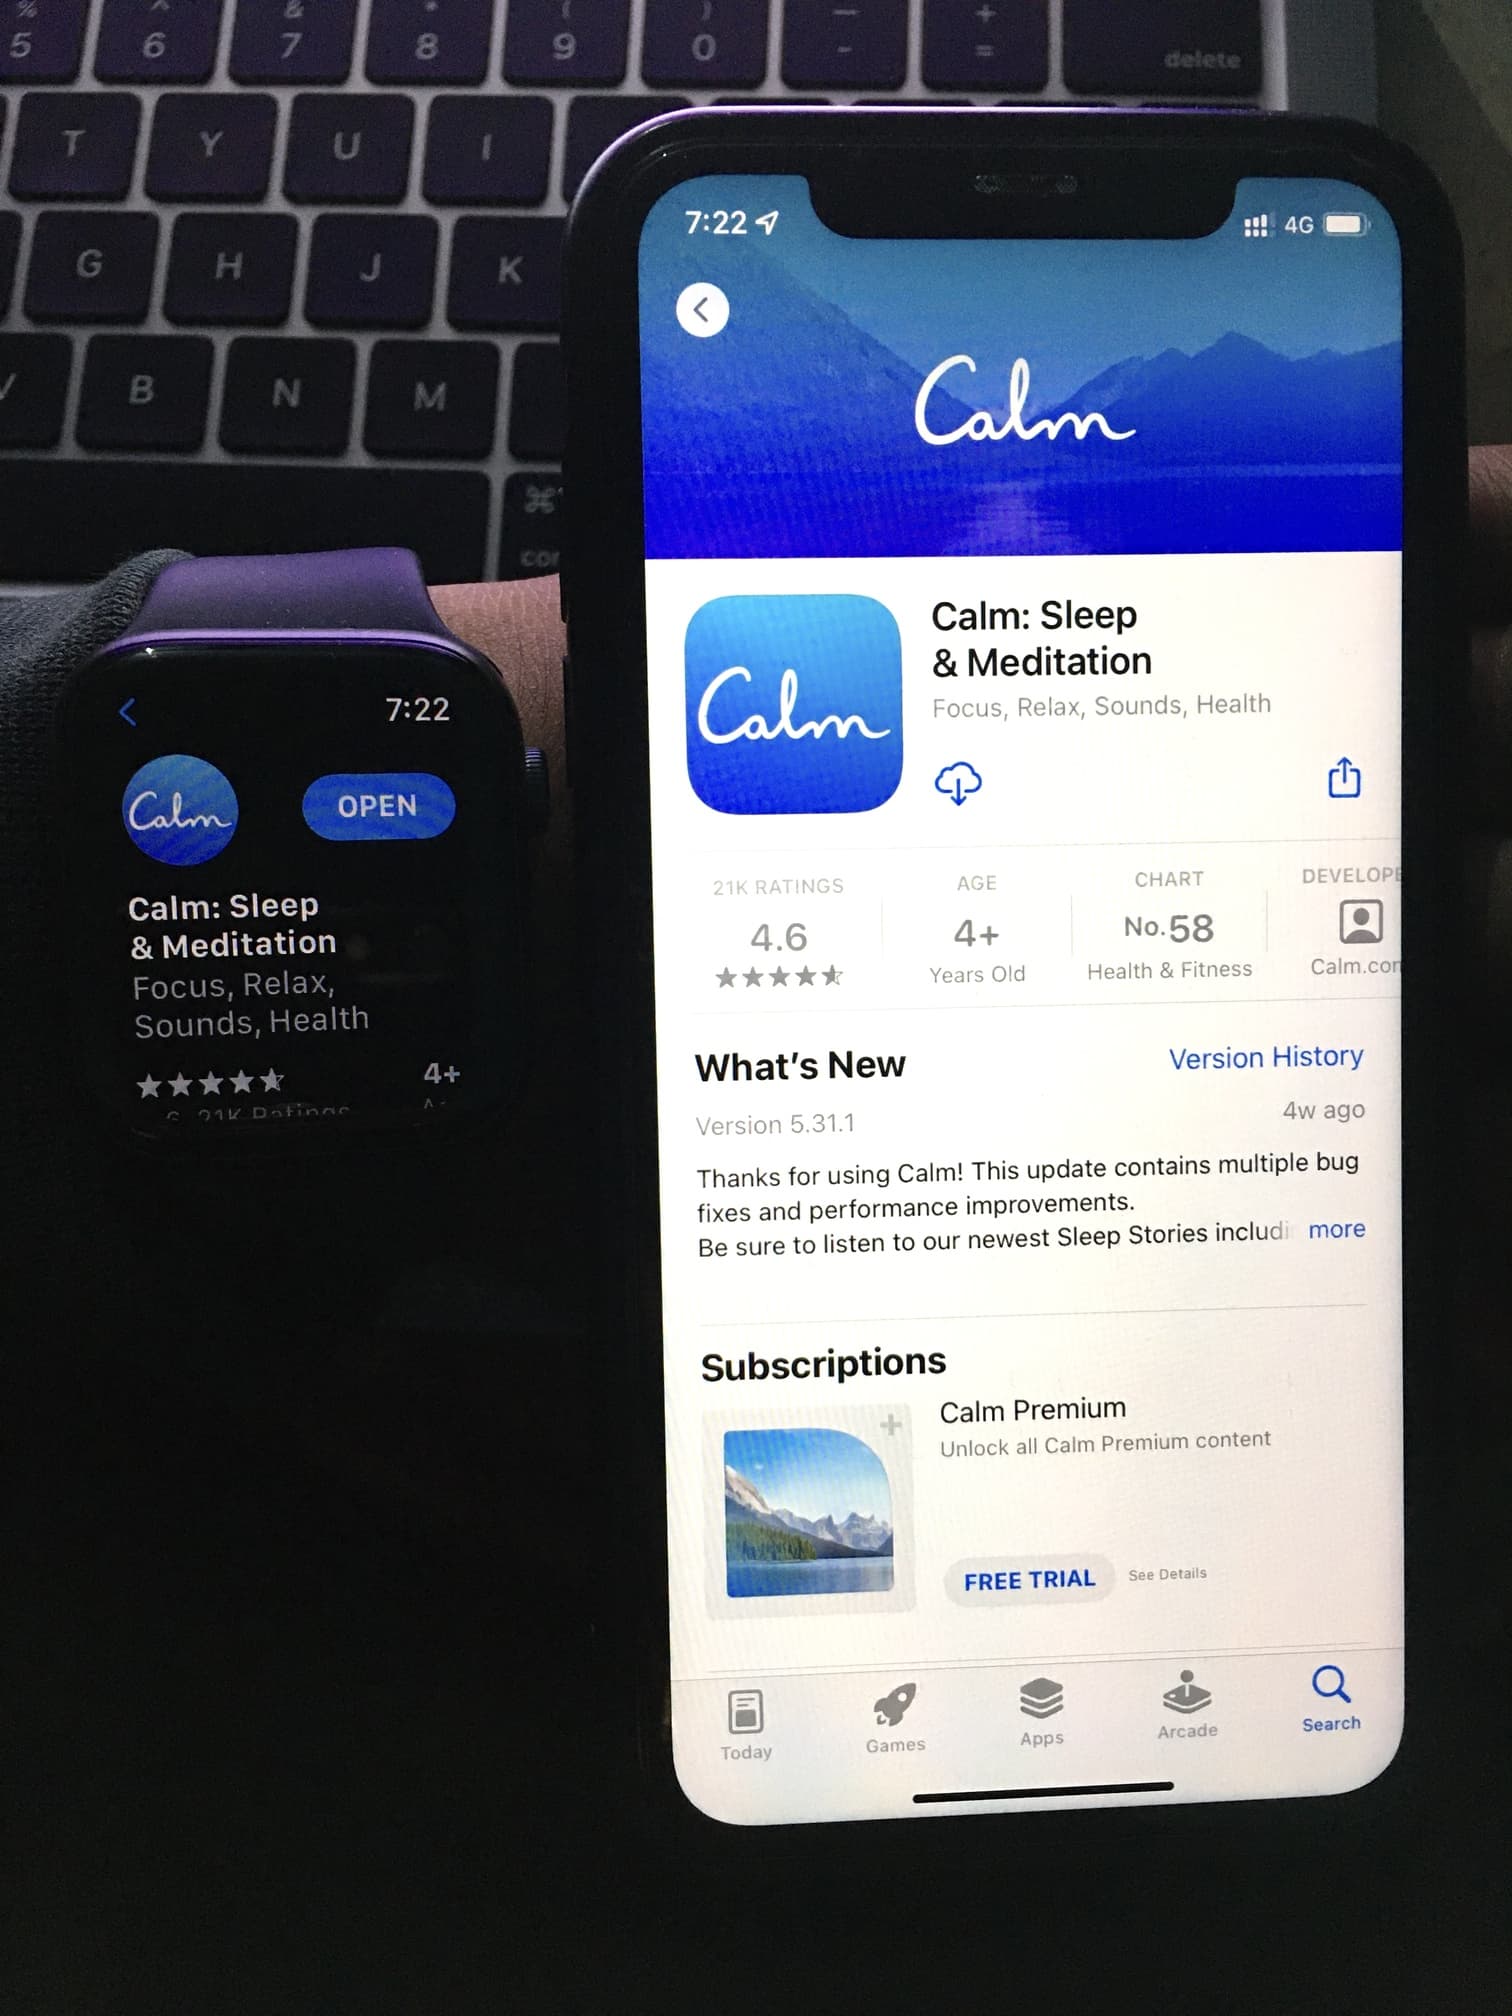 Same app on Apple Watch but not iPhone